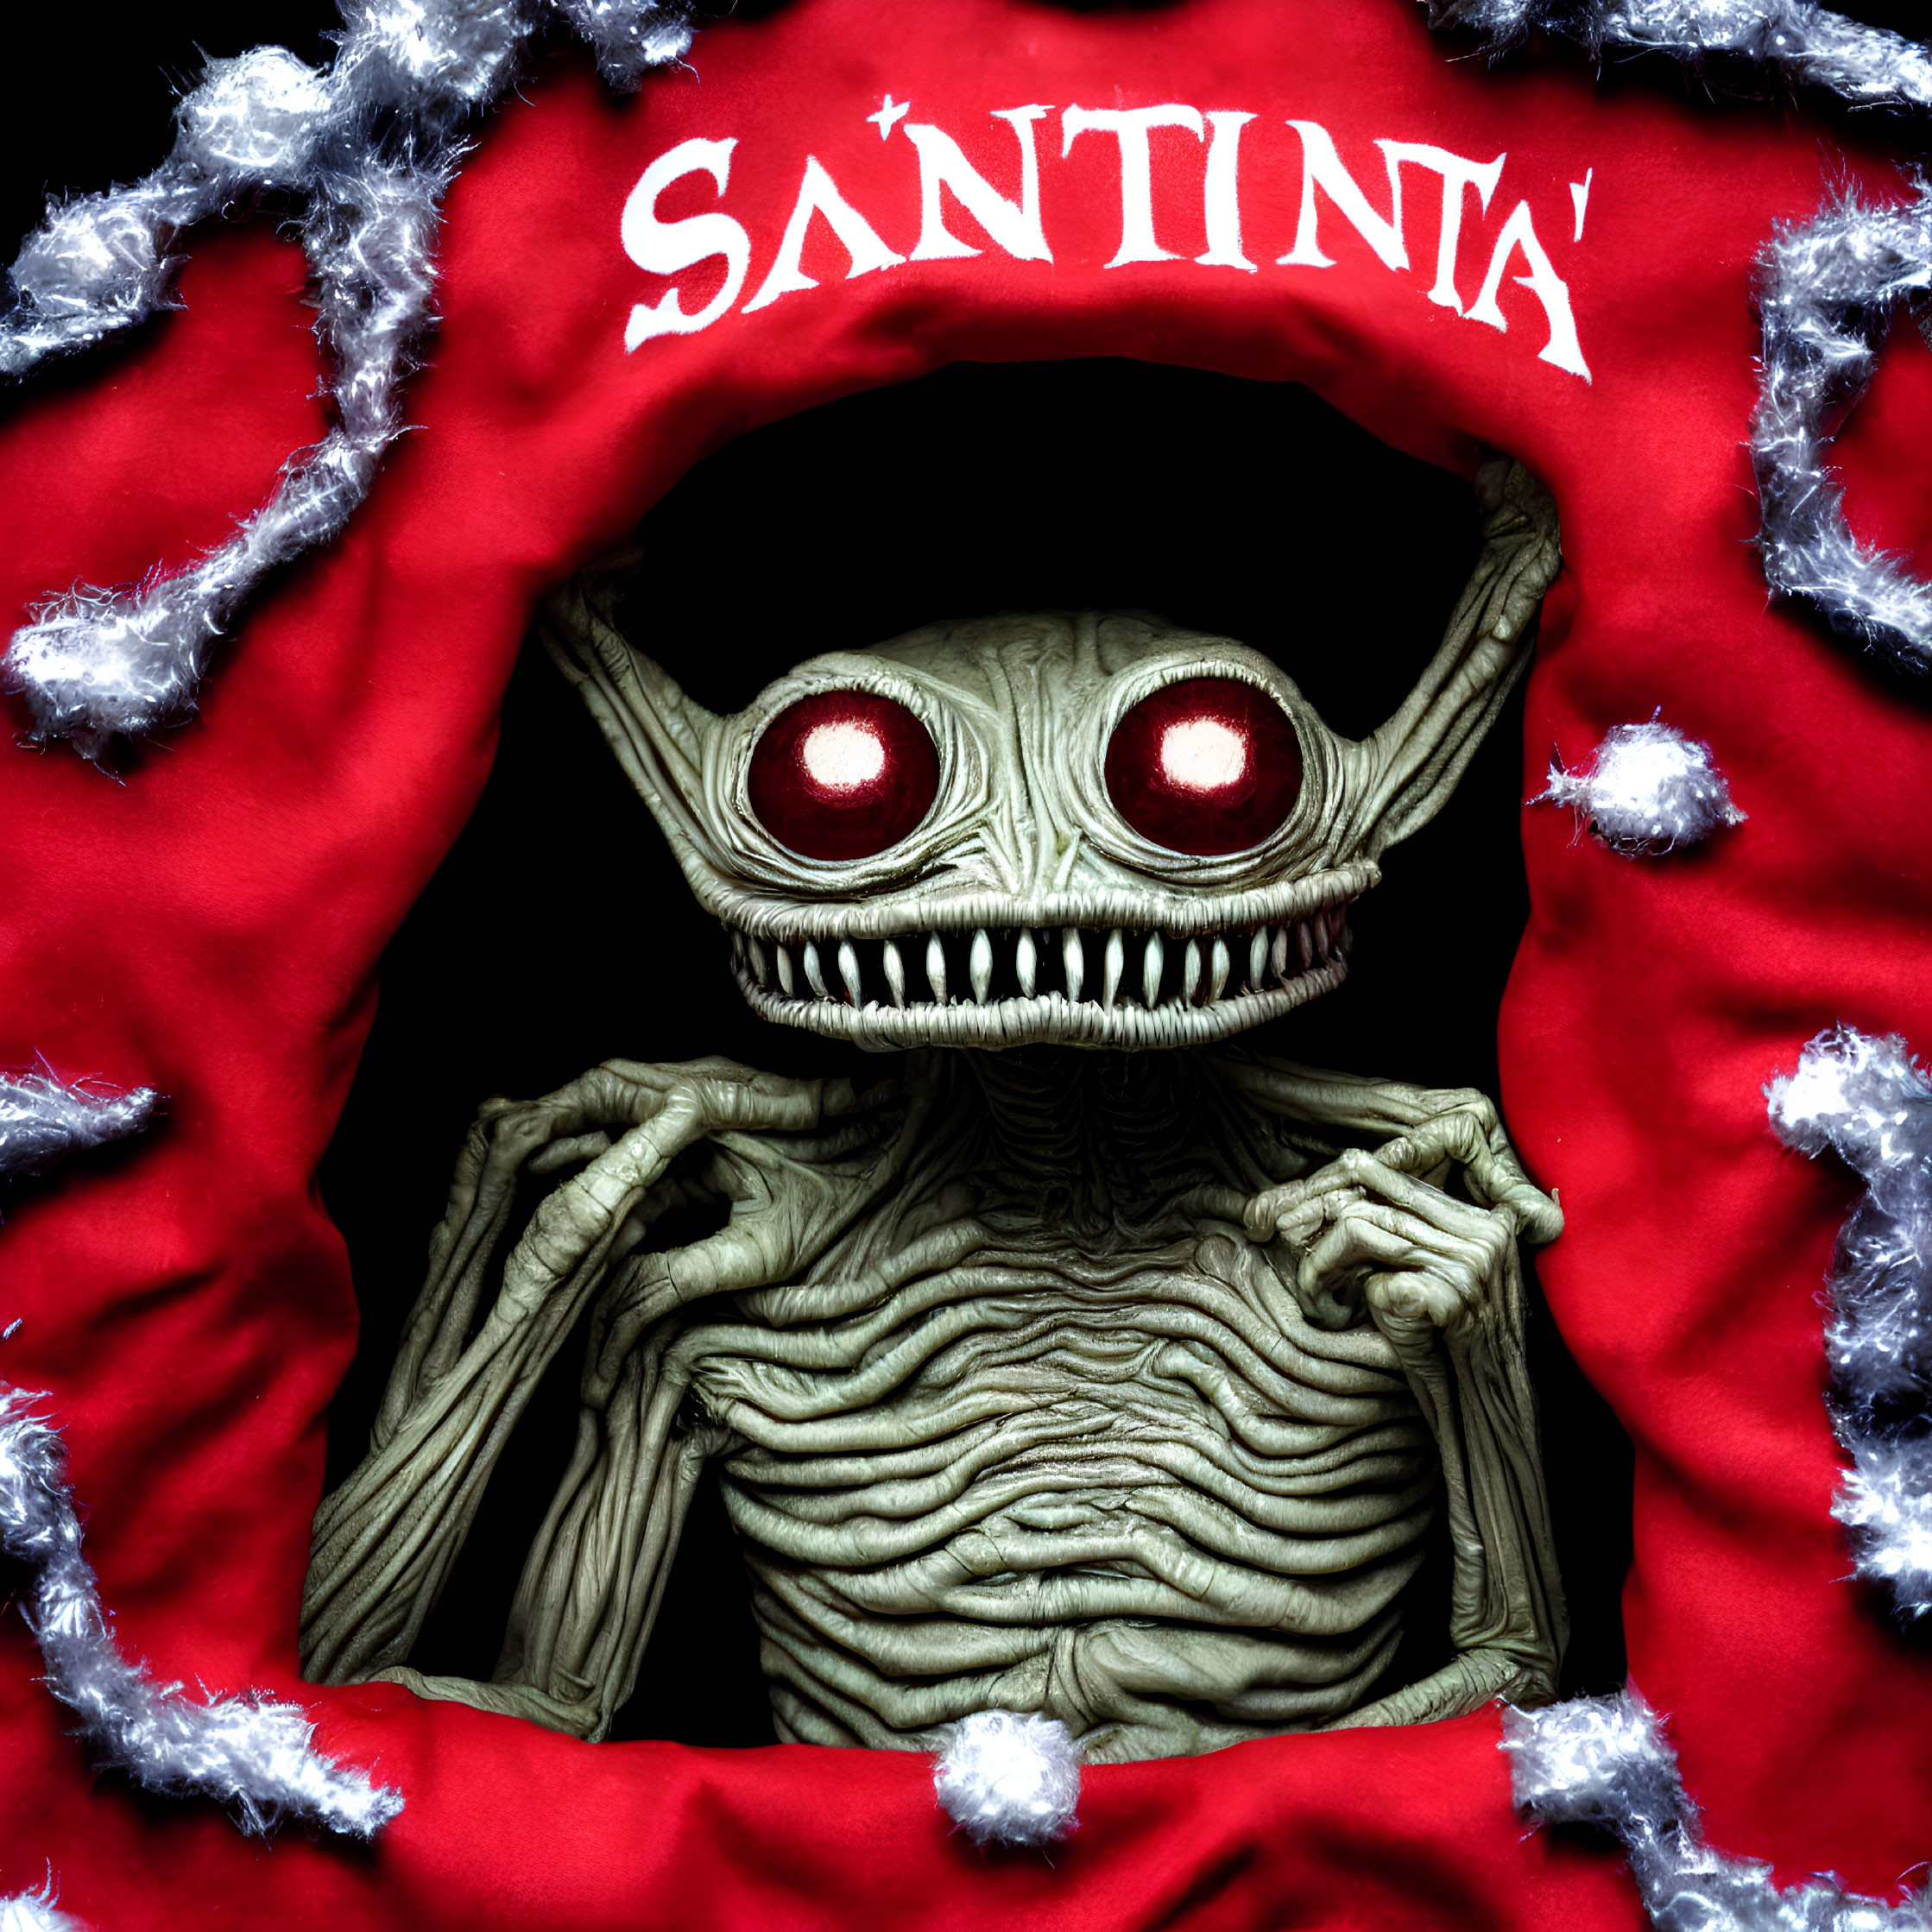 Toy-like figure with red eyes peeks from hole under "SANTINTA" banner